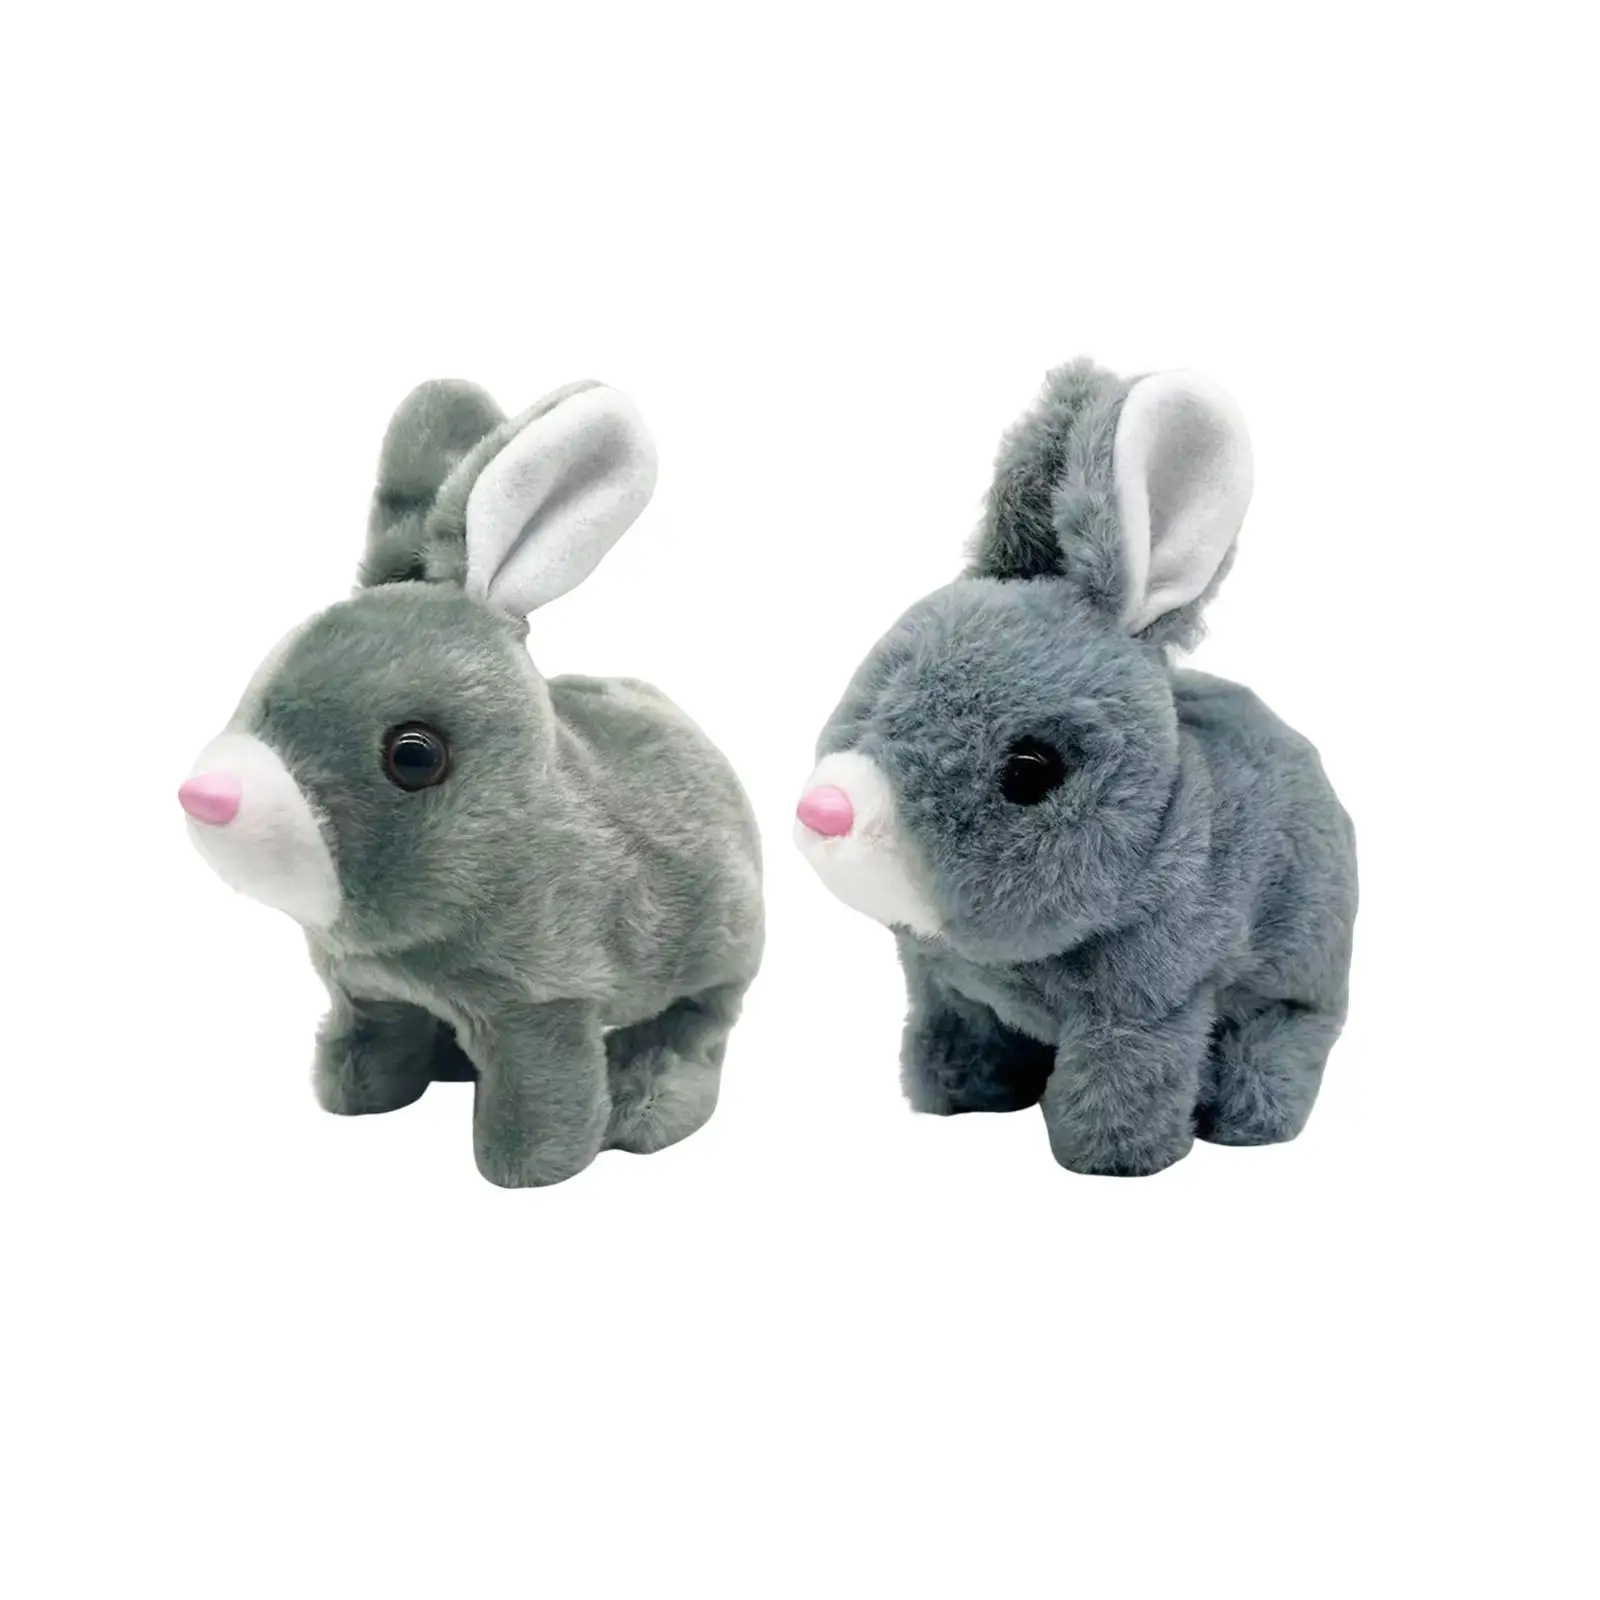 Electric Bunny Toys Adorable Easter Plush Toy for Bedtime Friend